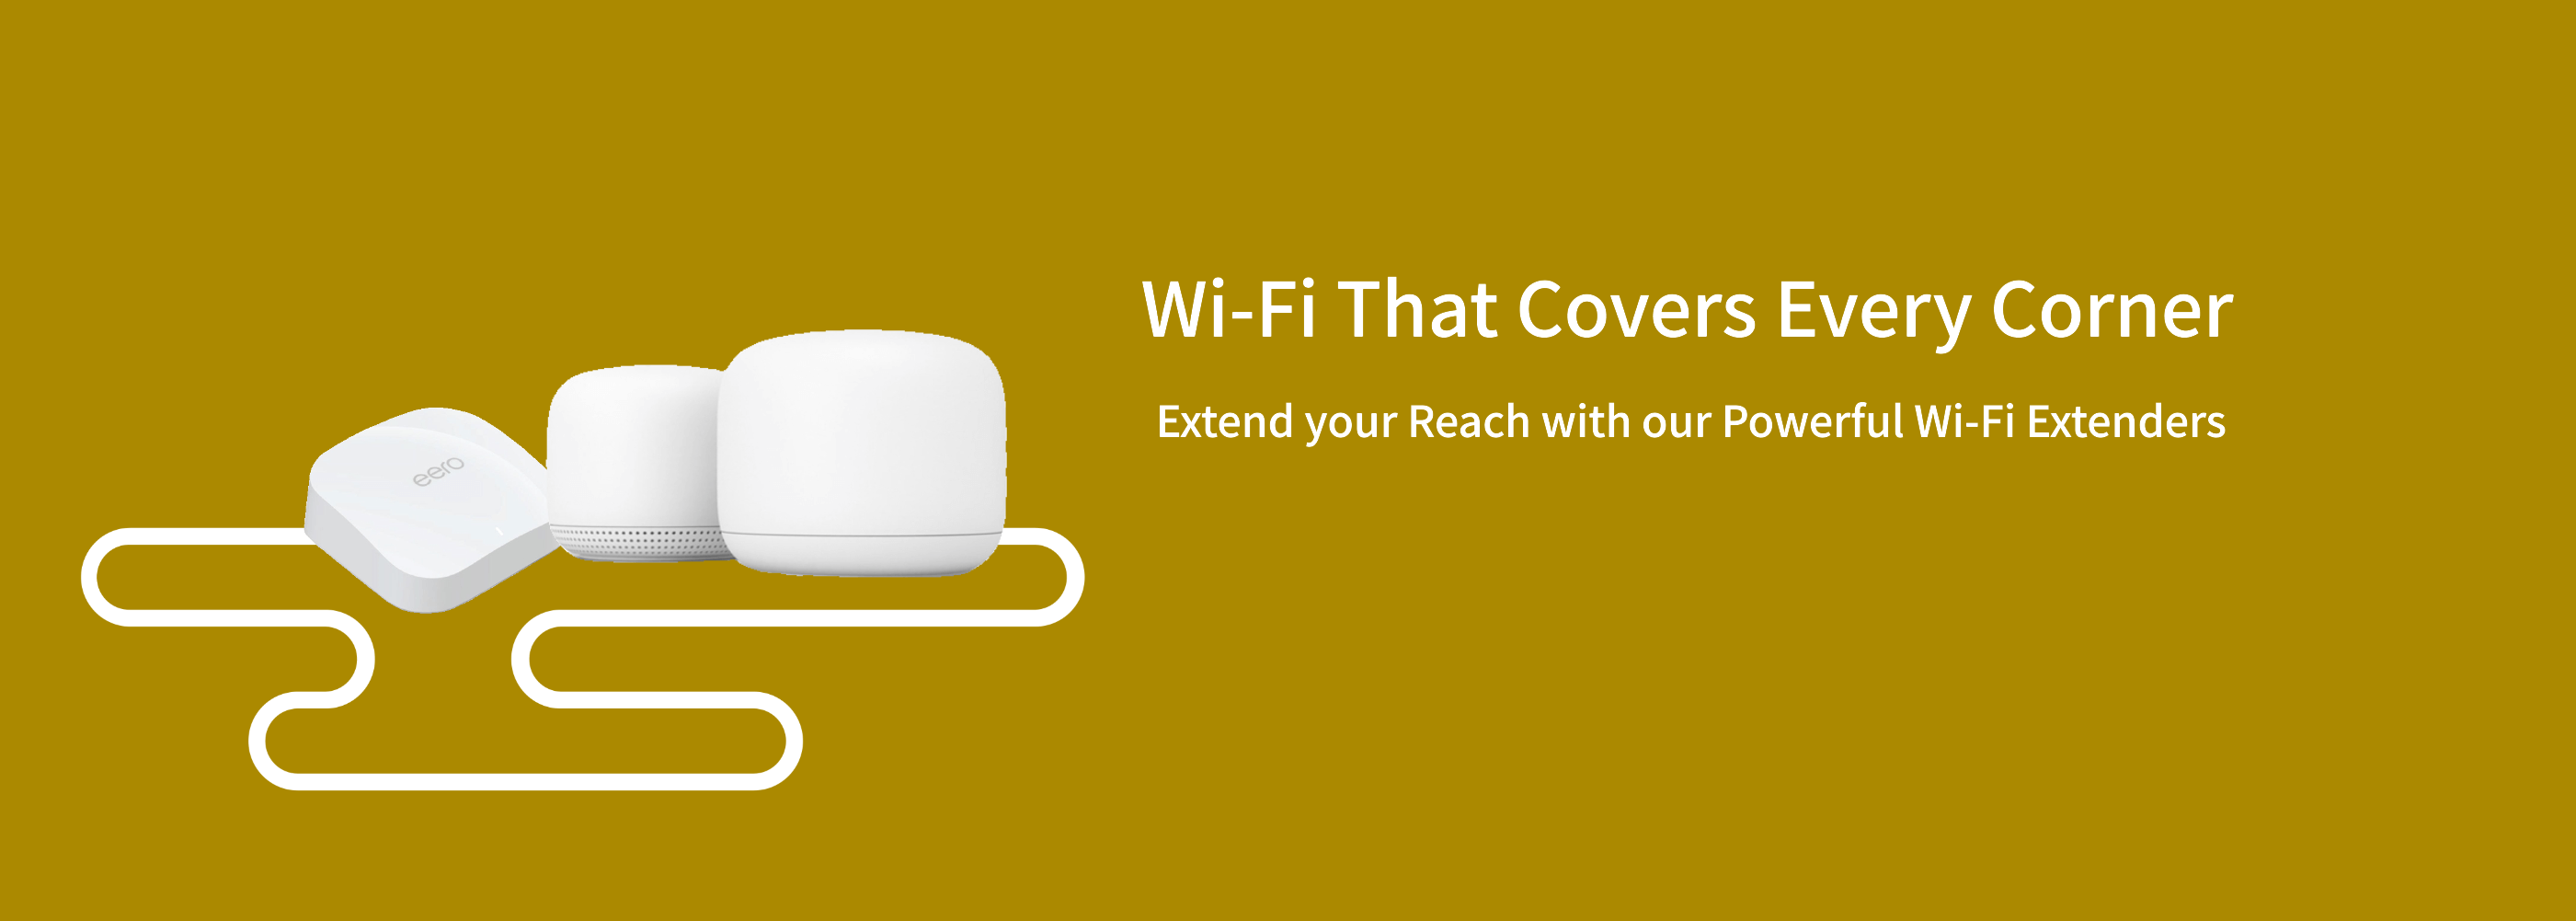 Desktop Slider Banner Router Mesh and other Network sulotions WiFi that covers every corner - Extend your reach with our powerful Wi-Fi Extenders